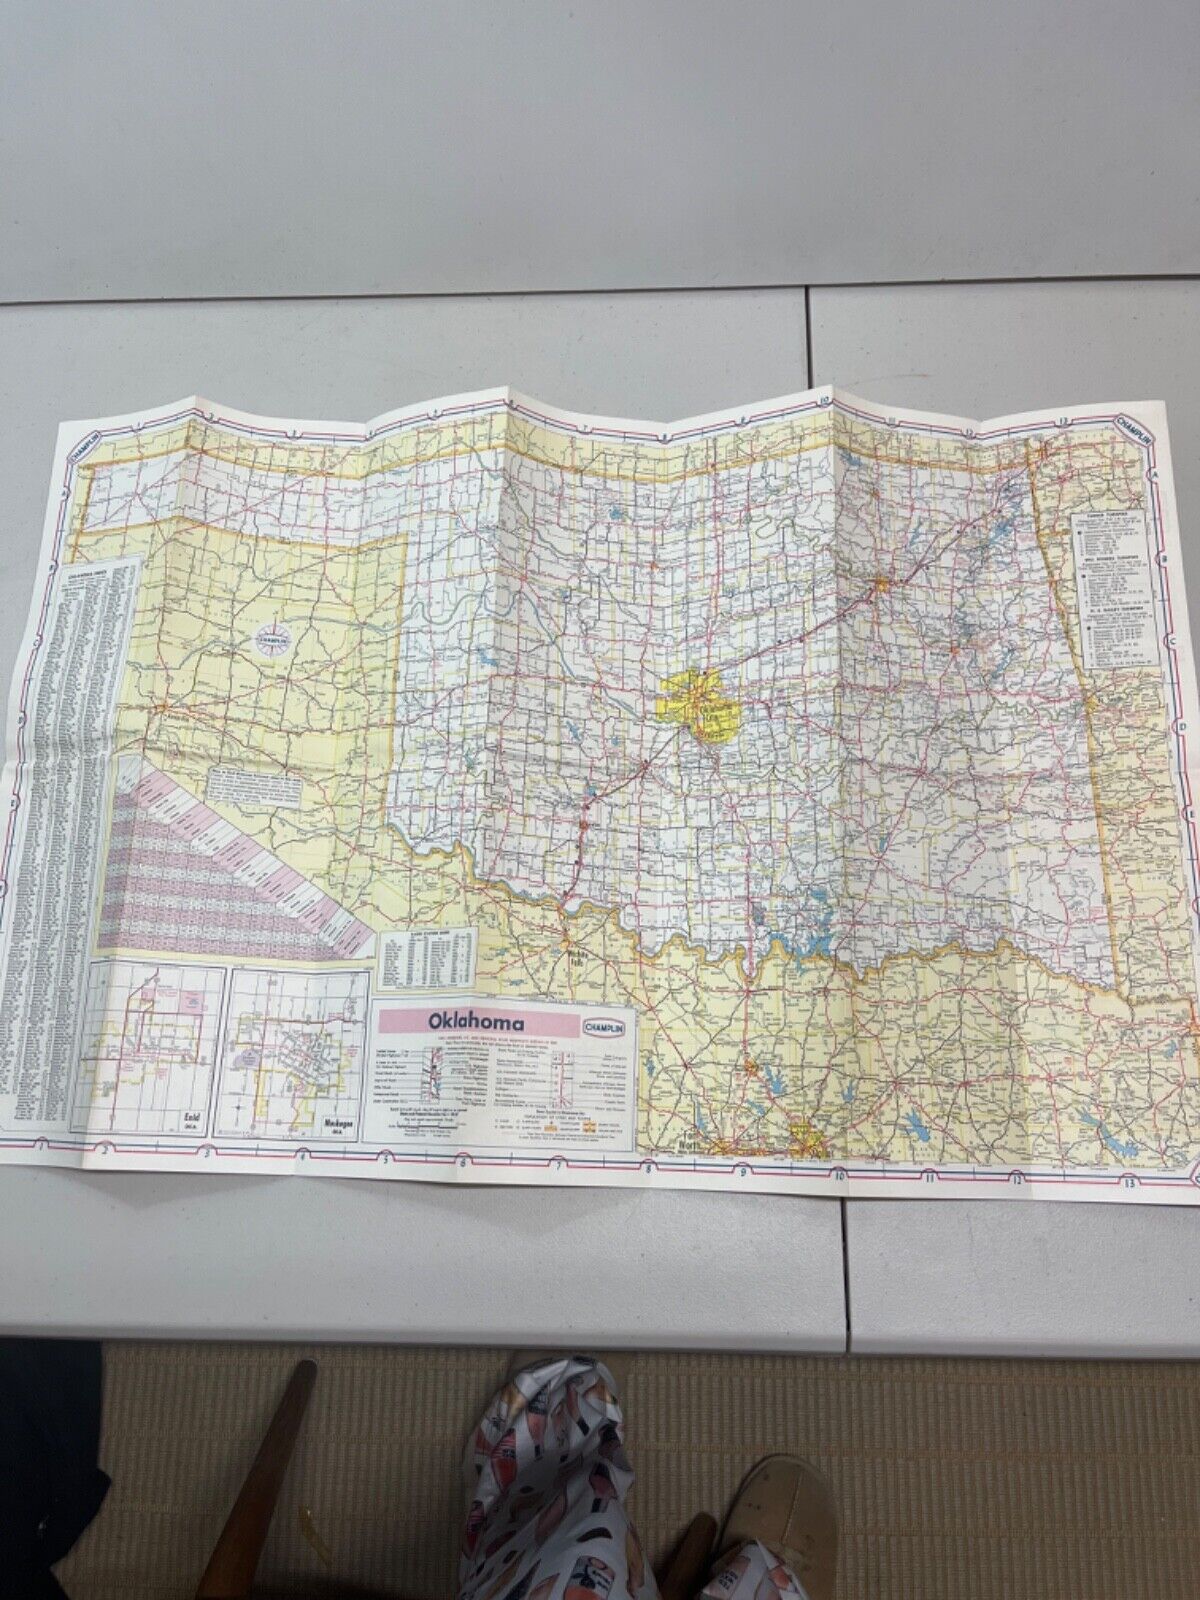 1964 Champlin Oklahoma Sightseeing in the Great Plains Map